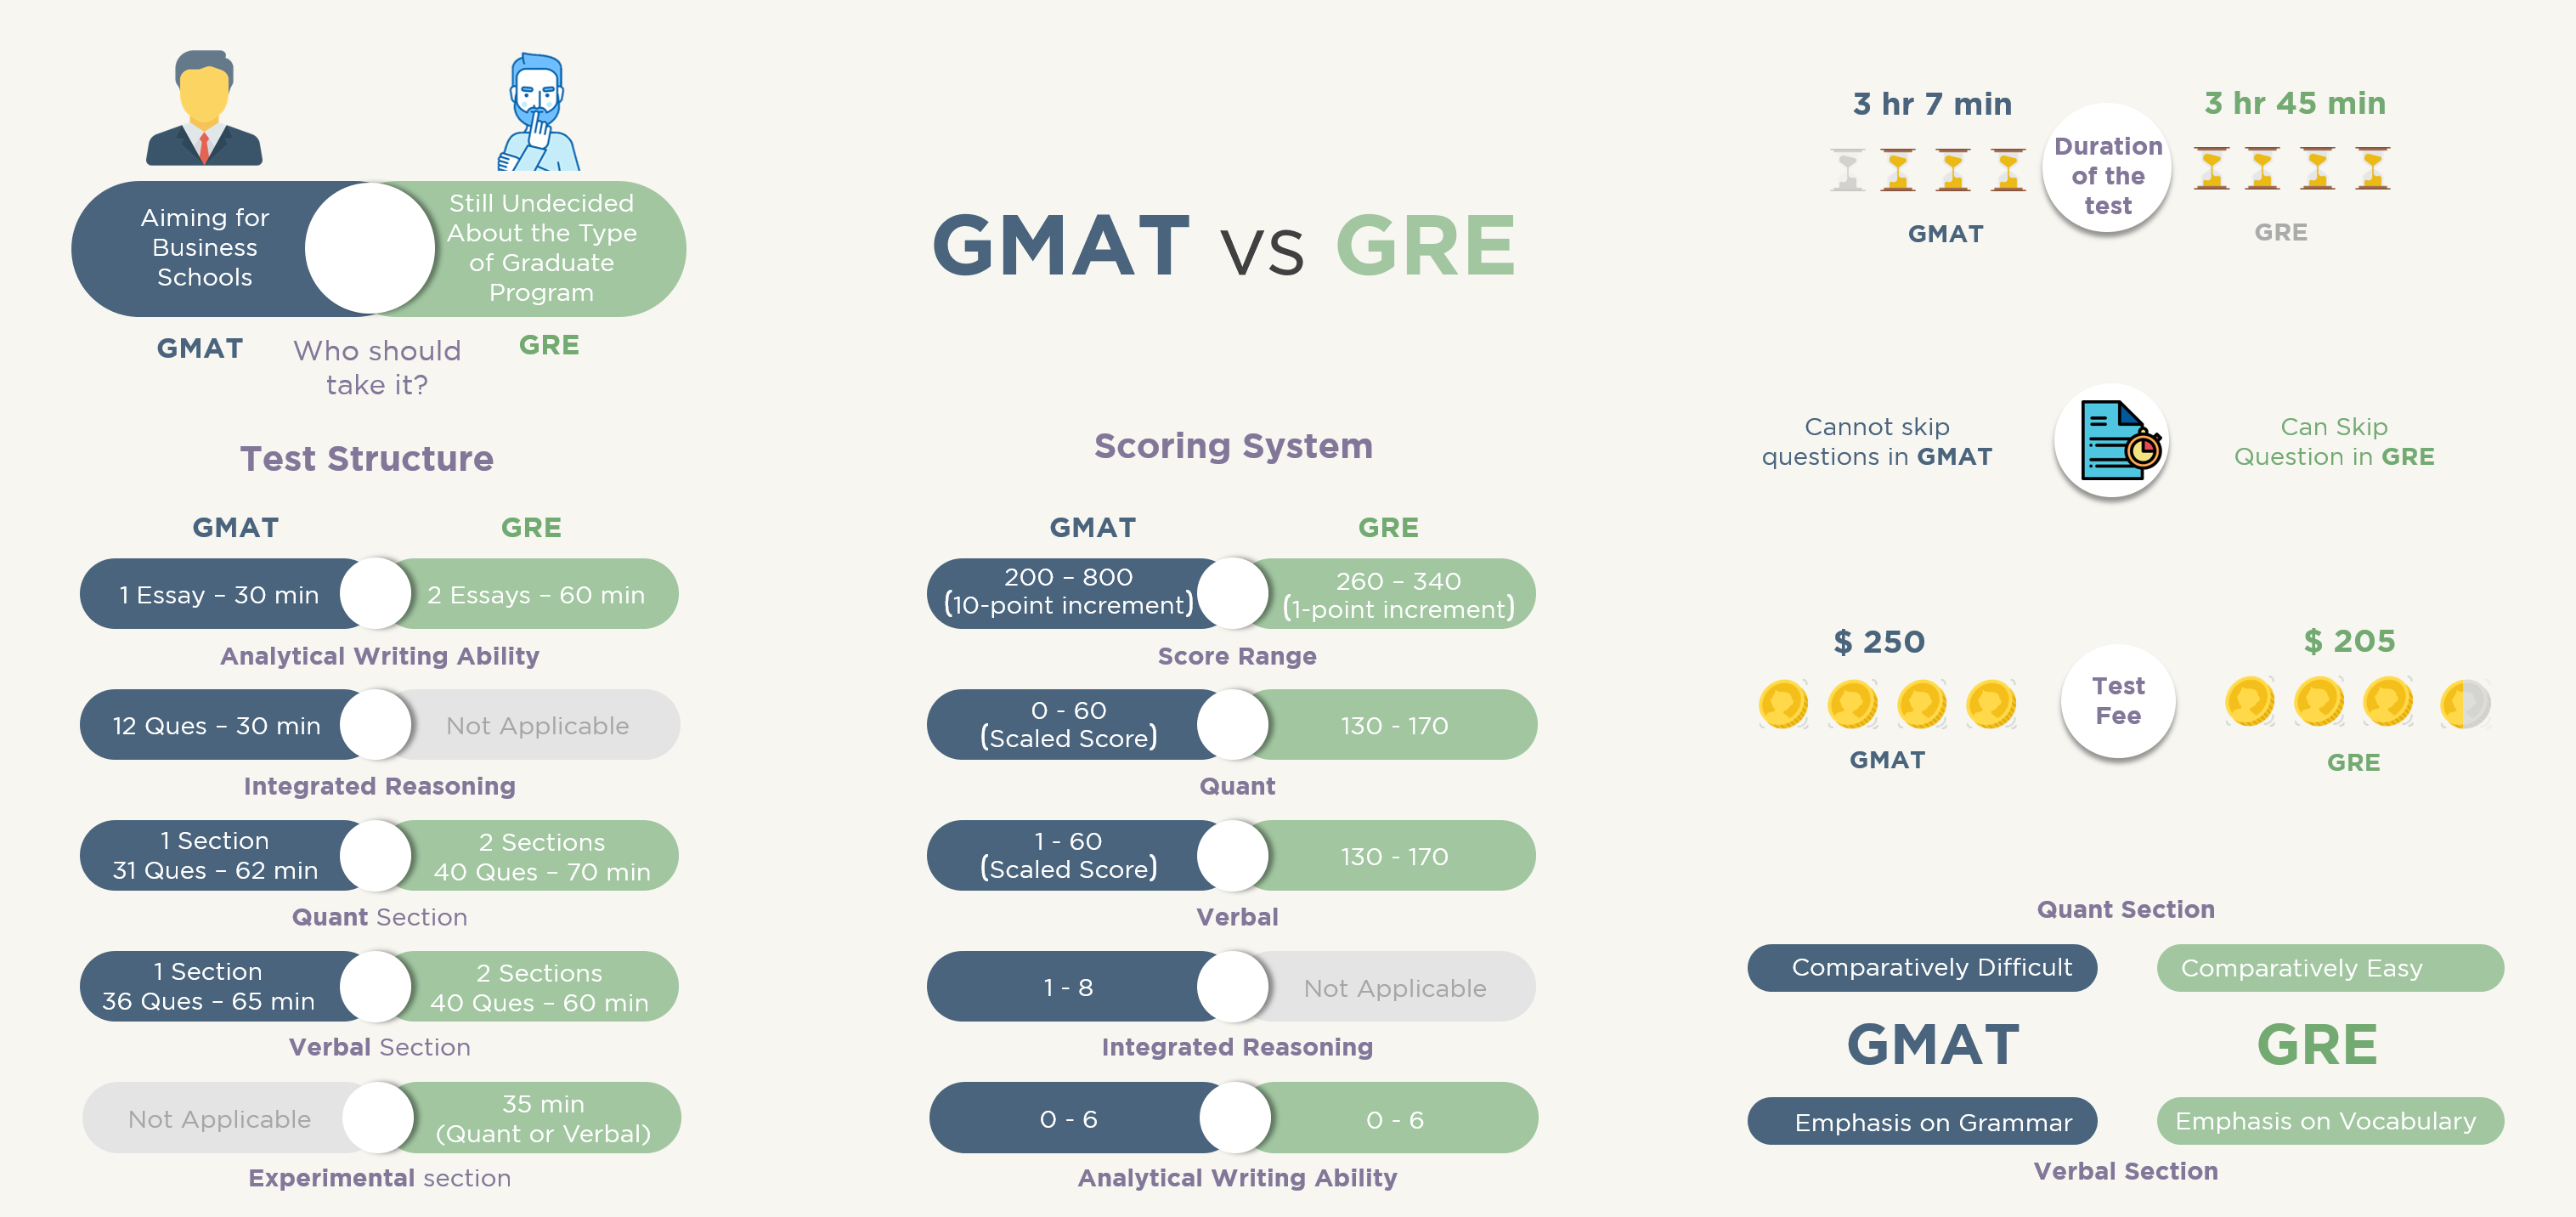 What are the key differences between GMAT and GRE?